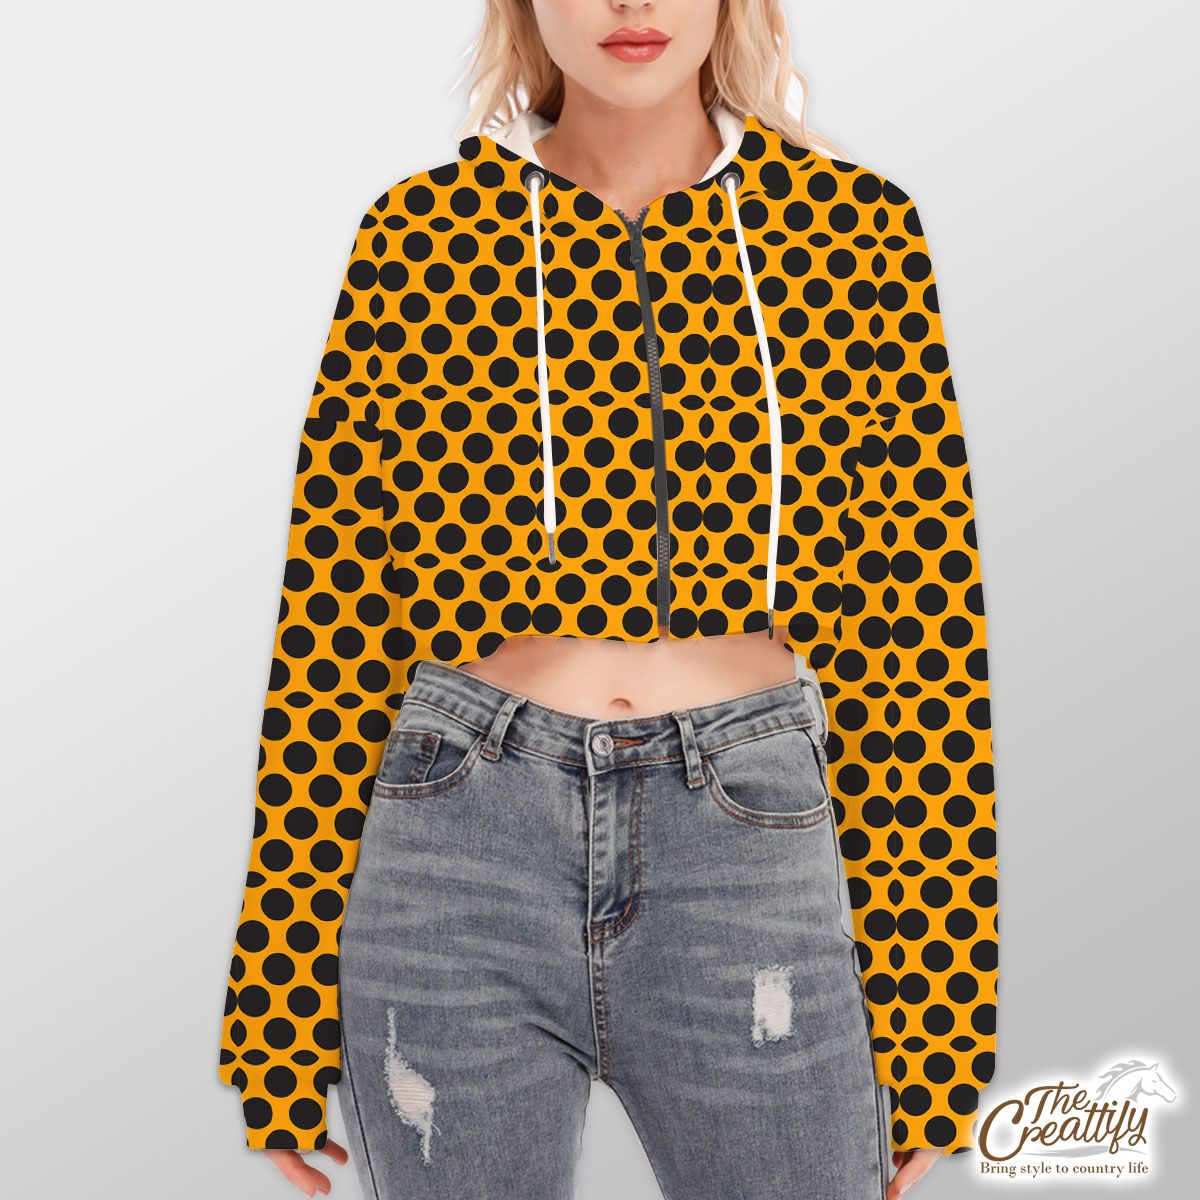 Black Dot On Yellow Background Halloween Hoodie With Zipper Closure